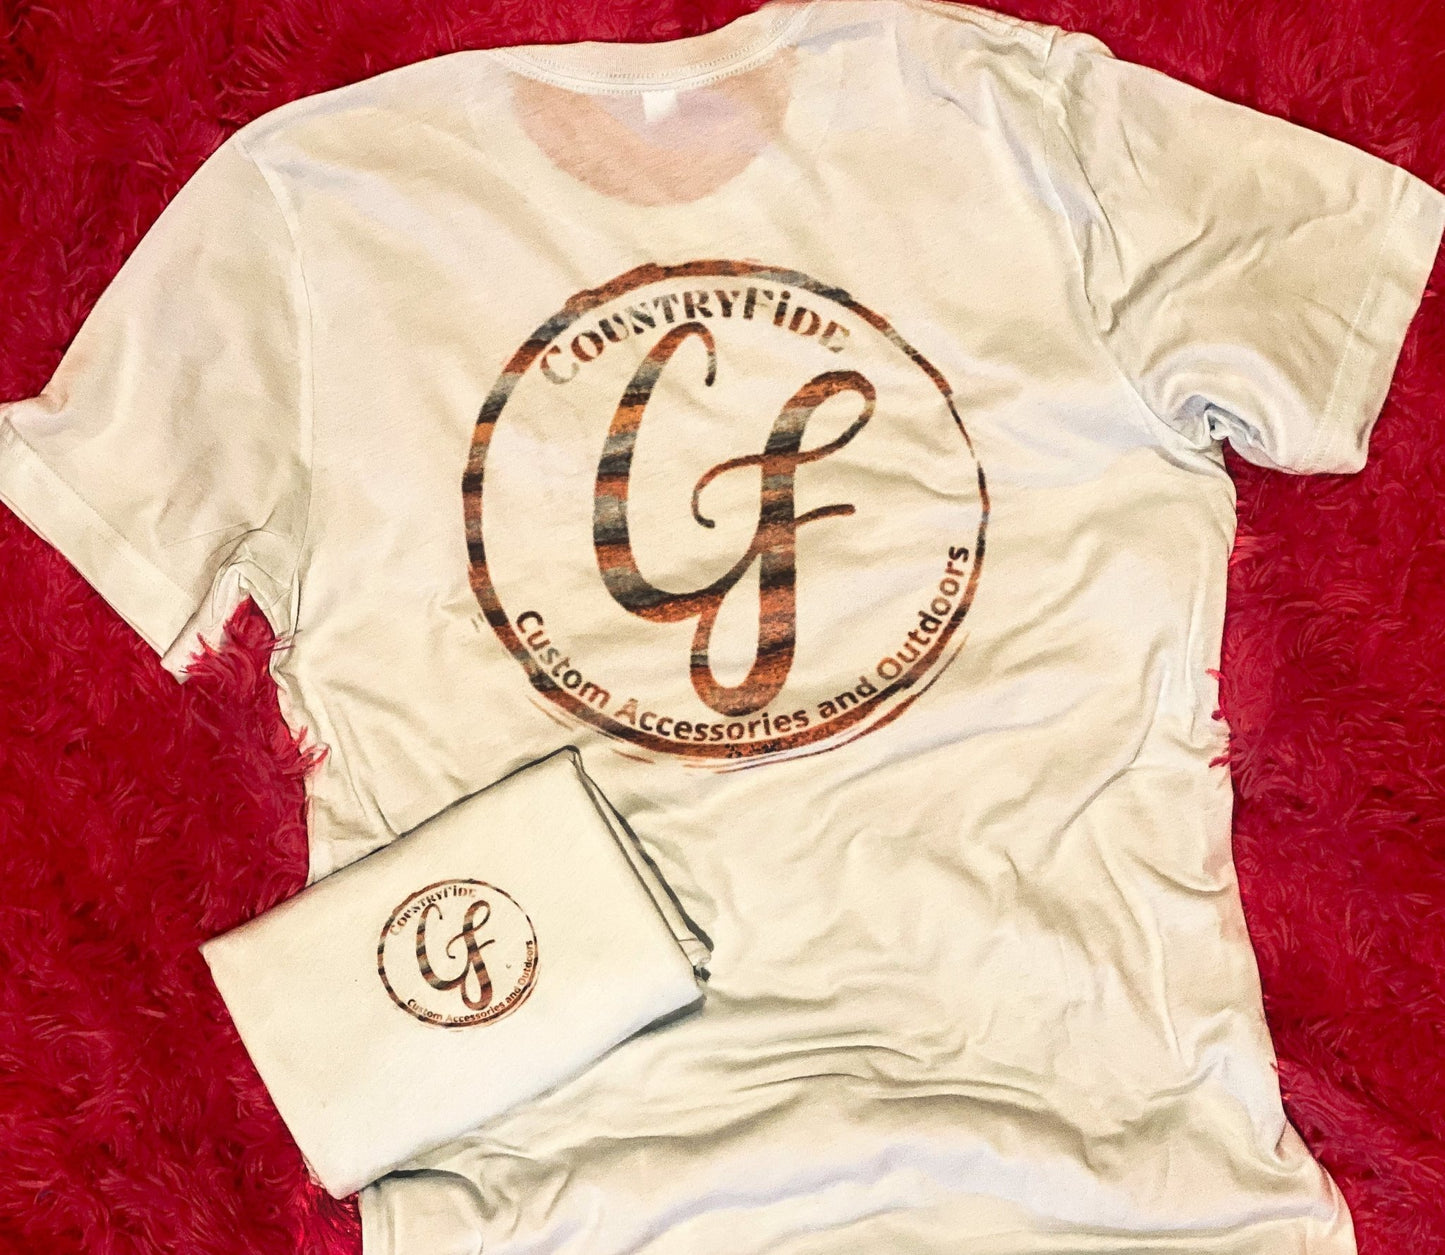 COUNTRYFIDE BRANDED TEE - CountryFide Custom Accessories and Outdoors